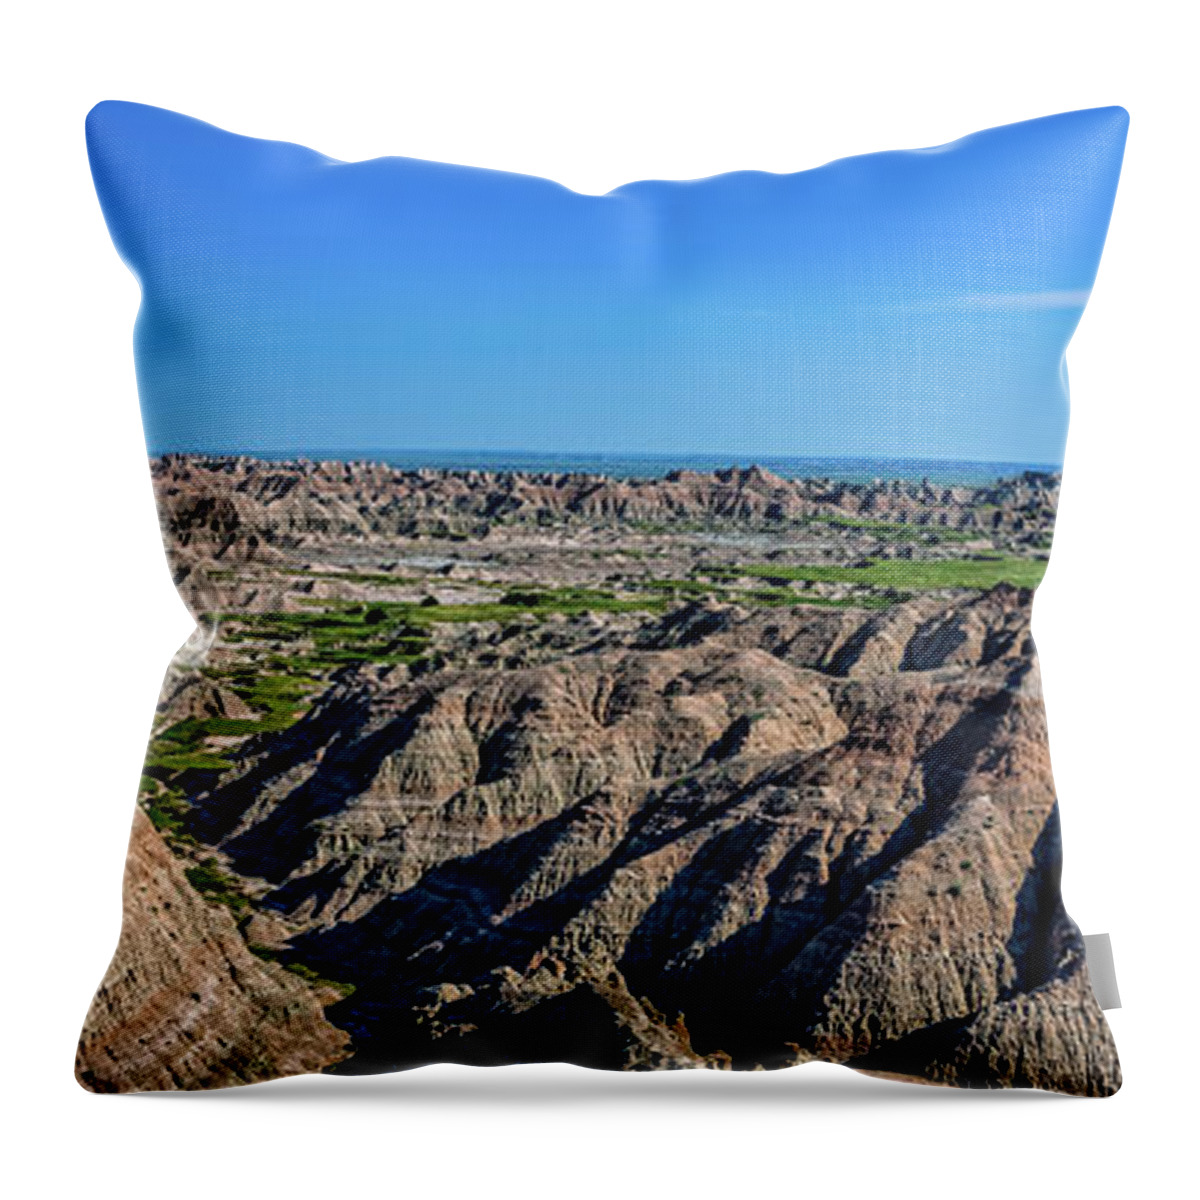 Badlands Throw Pillow featuring the photograph Badlands Planet by Chris Spencer